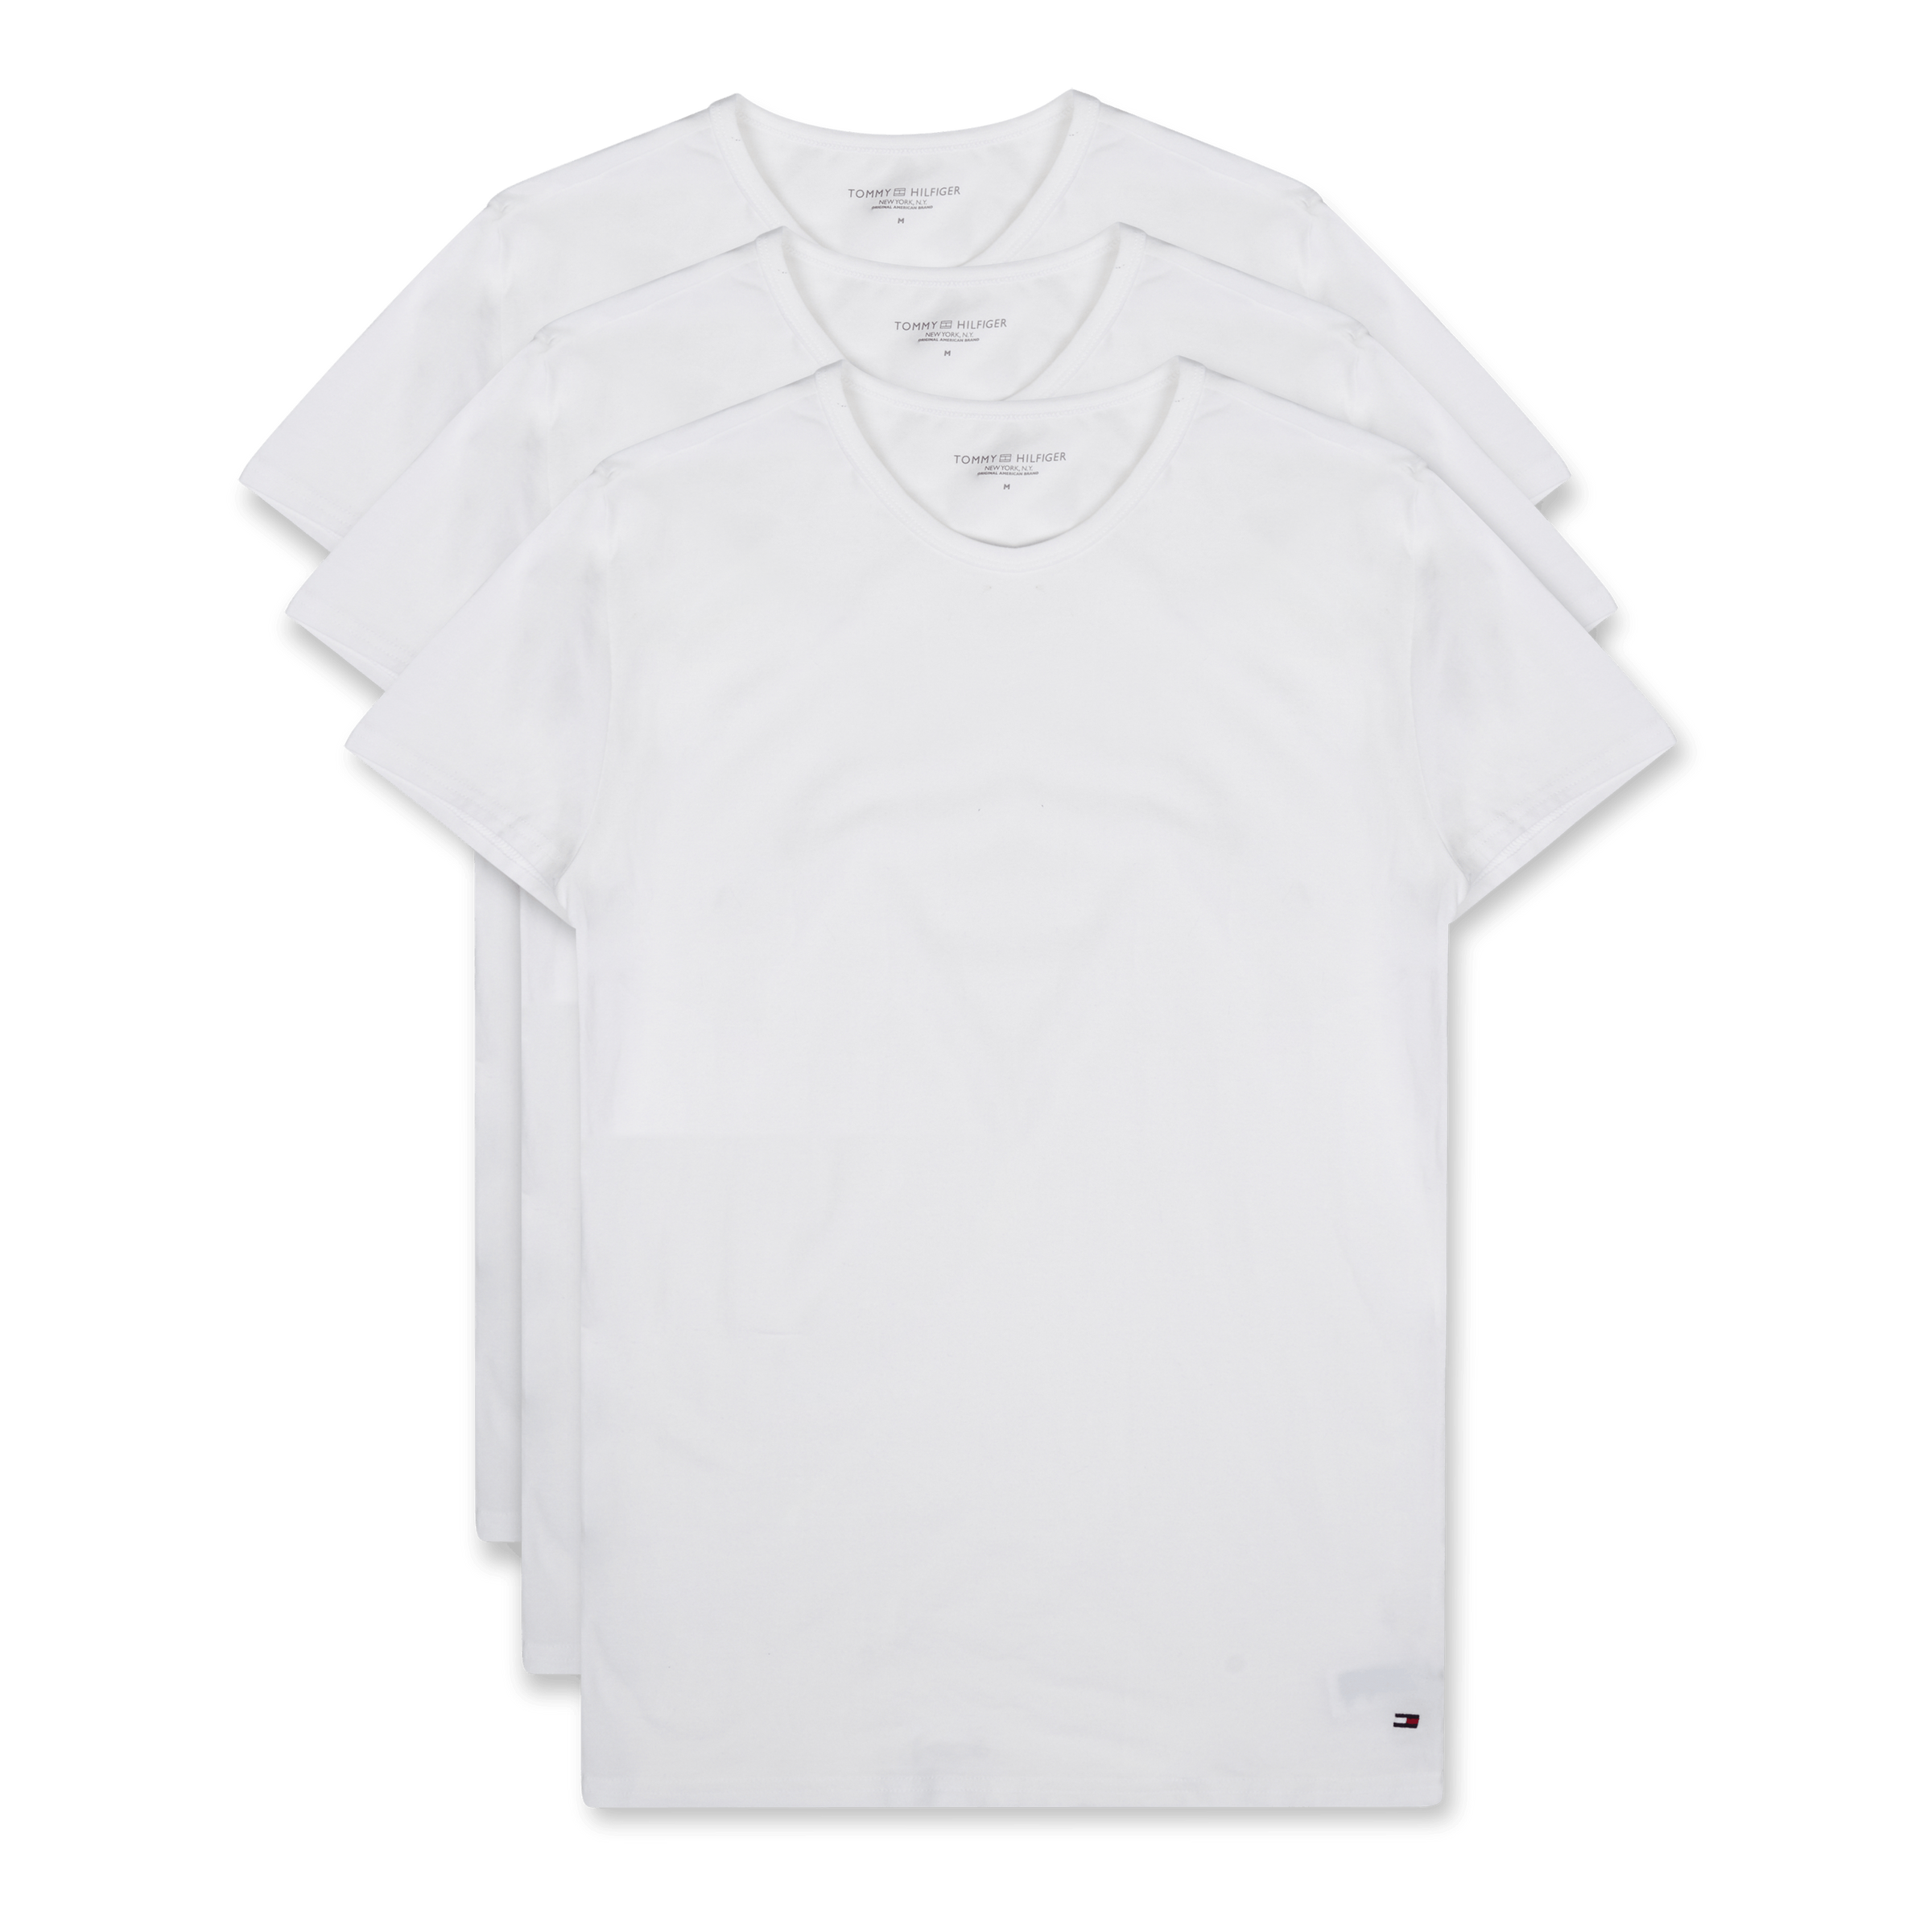 Stretch Cn Tee Ss 3pack 100 White – Stayhard.com